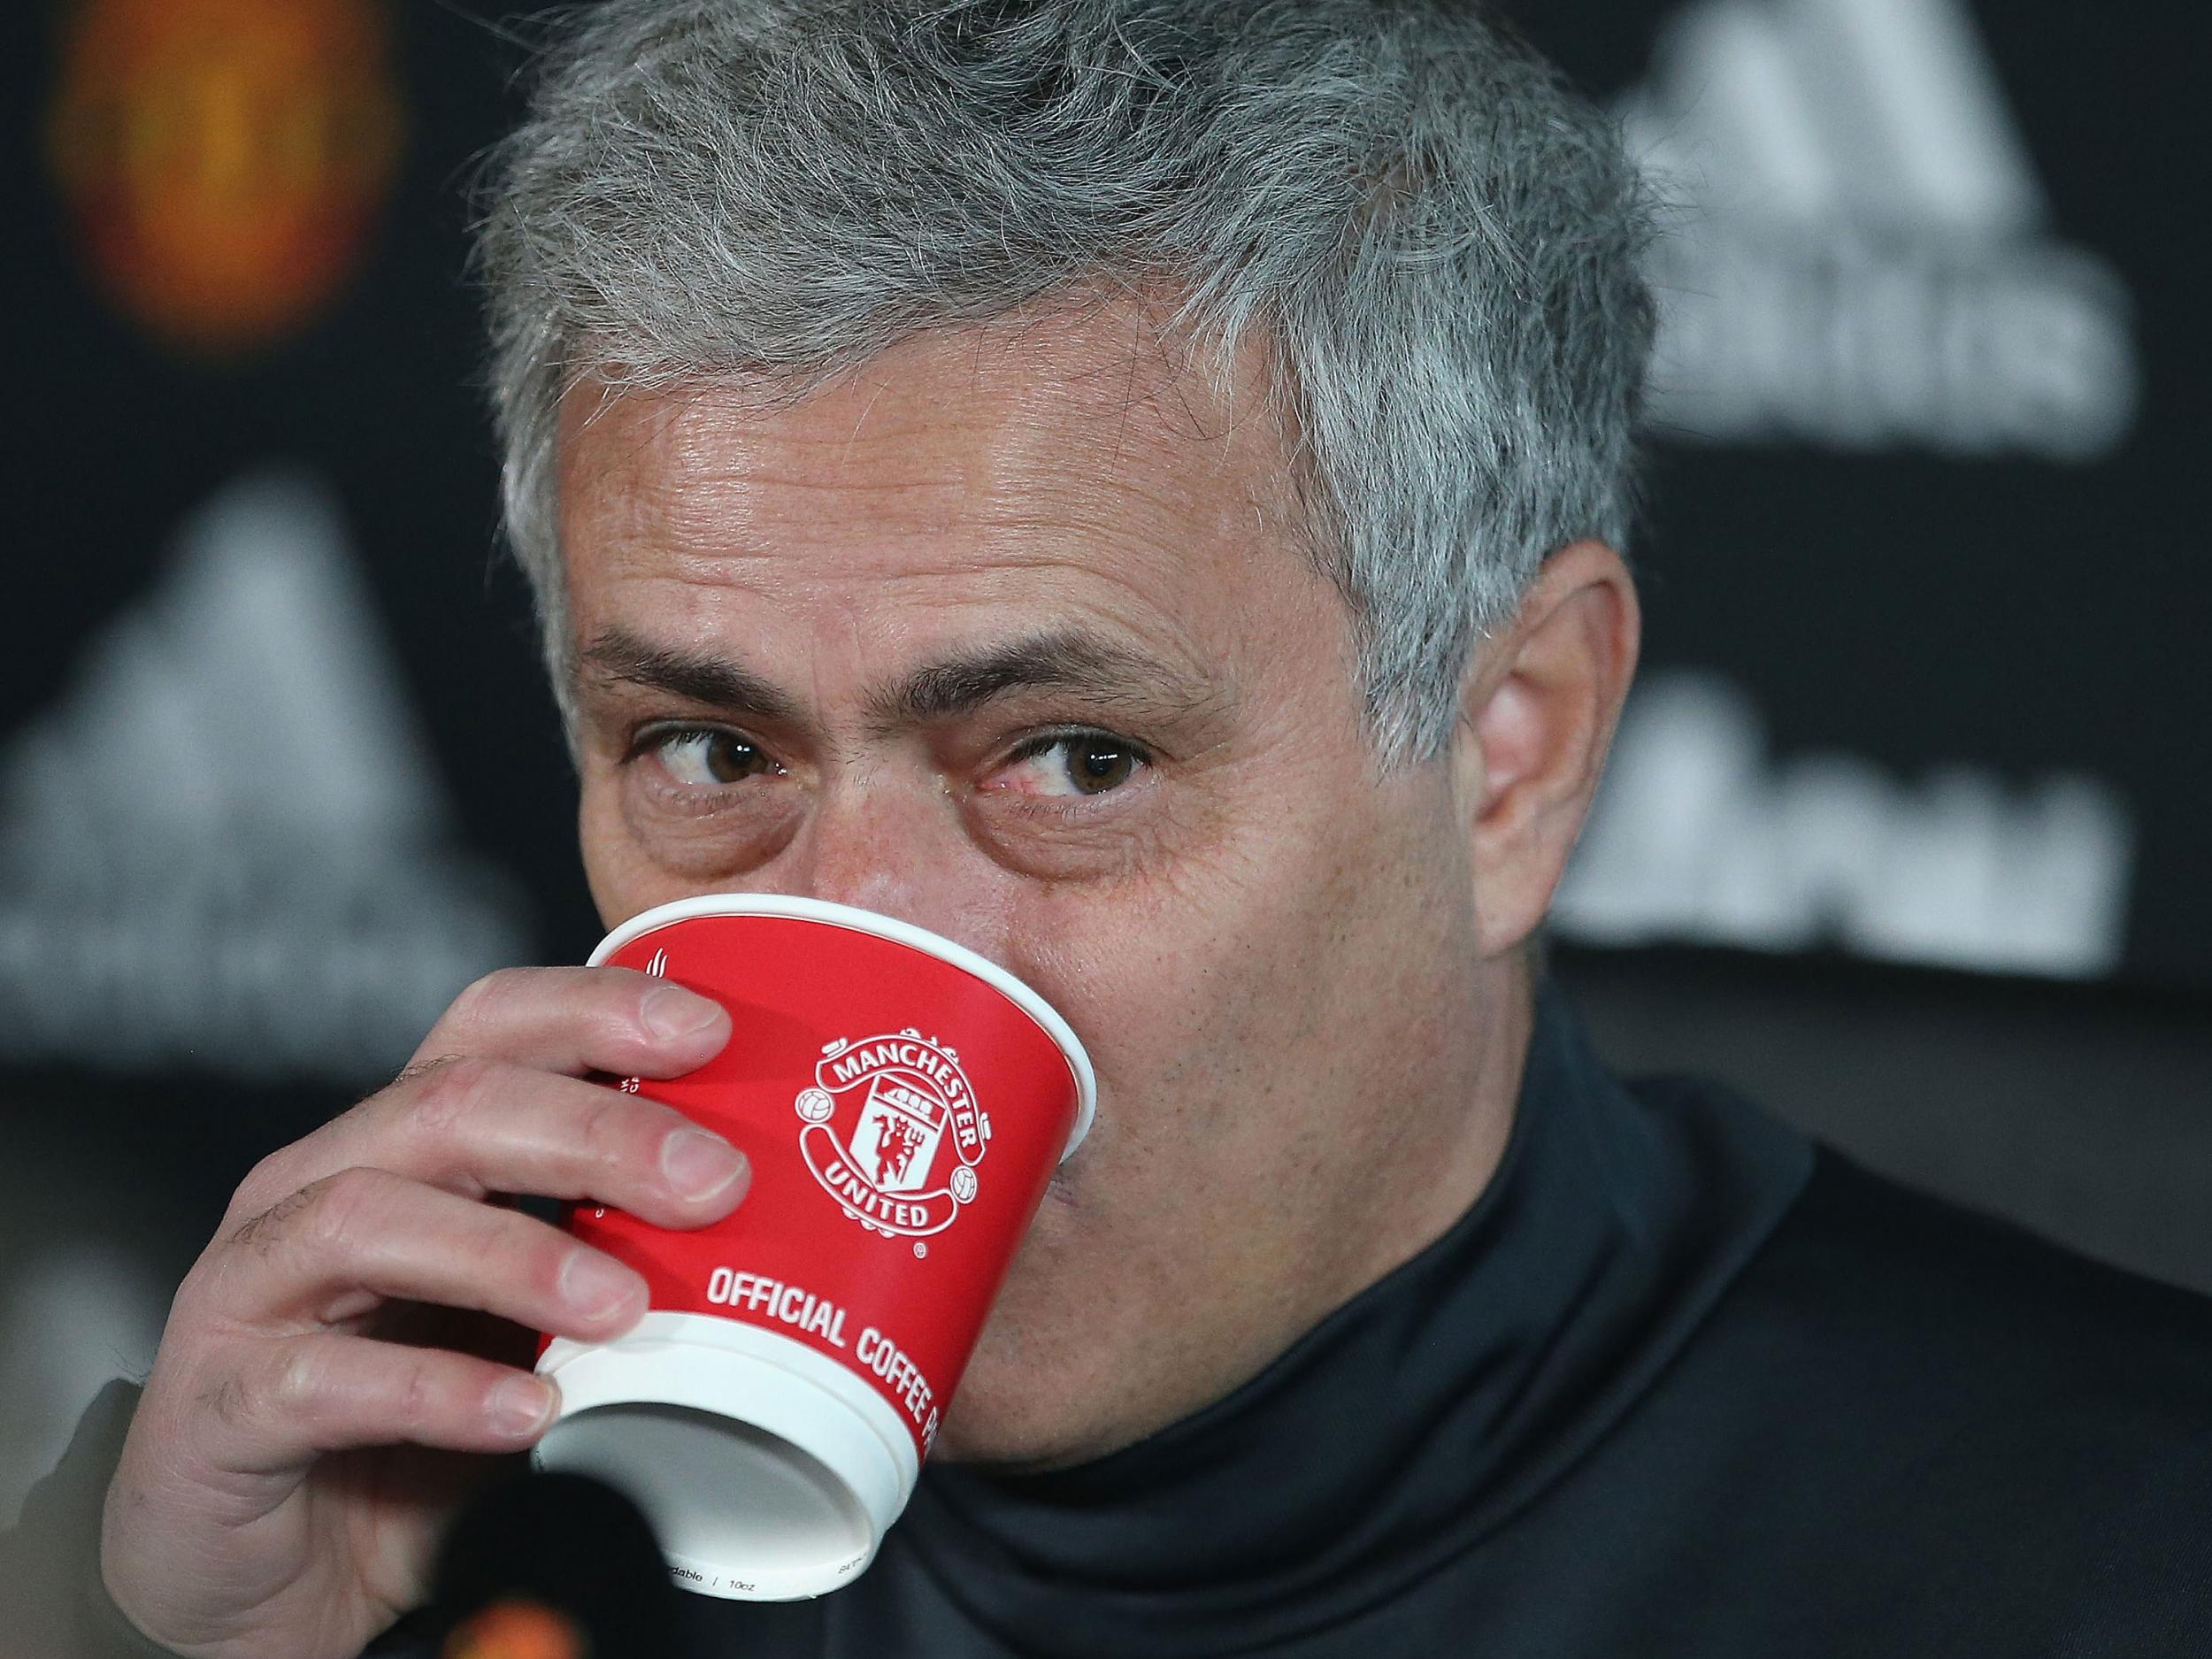 Jose Mourinho will take whatever approach he feels is necessary to beat Liverpool